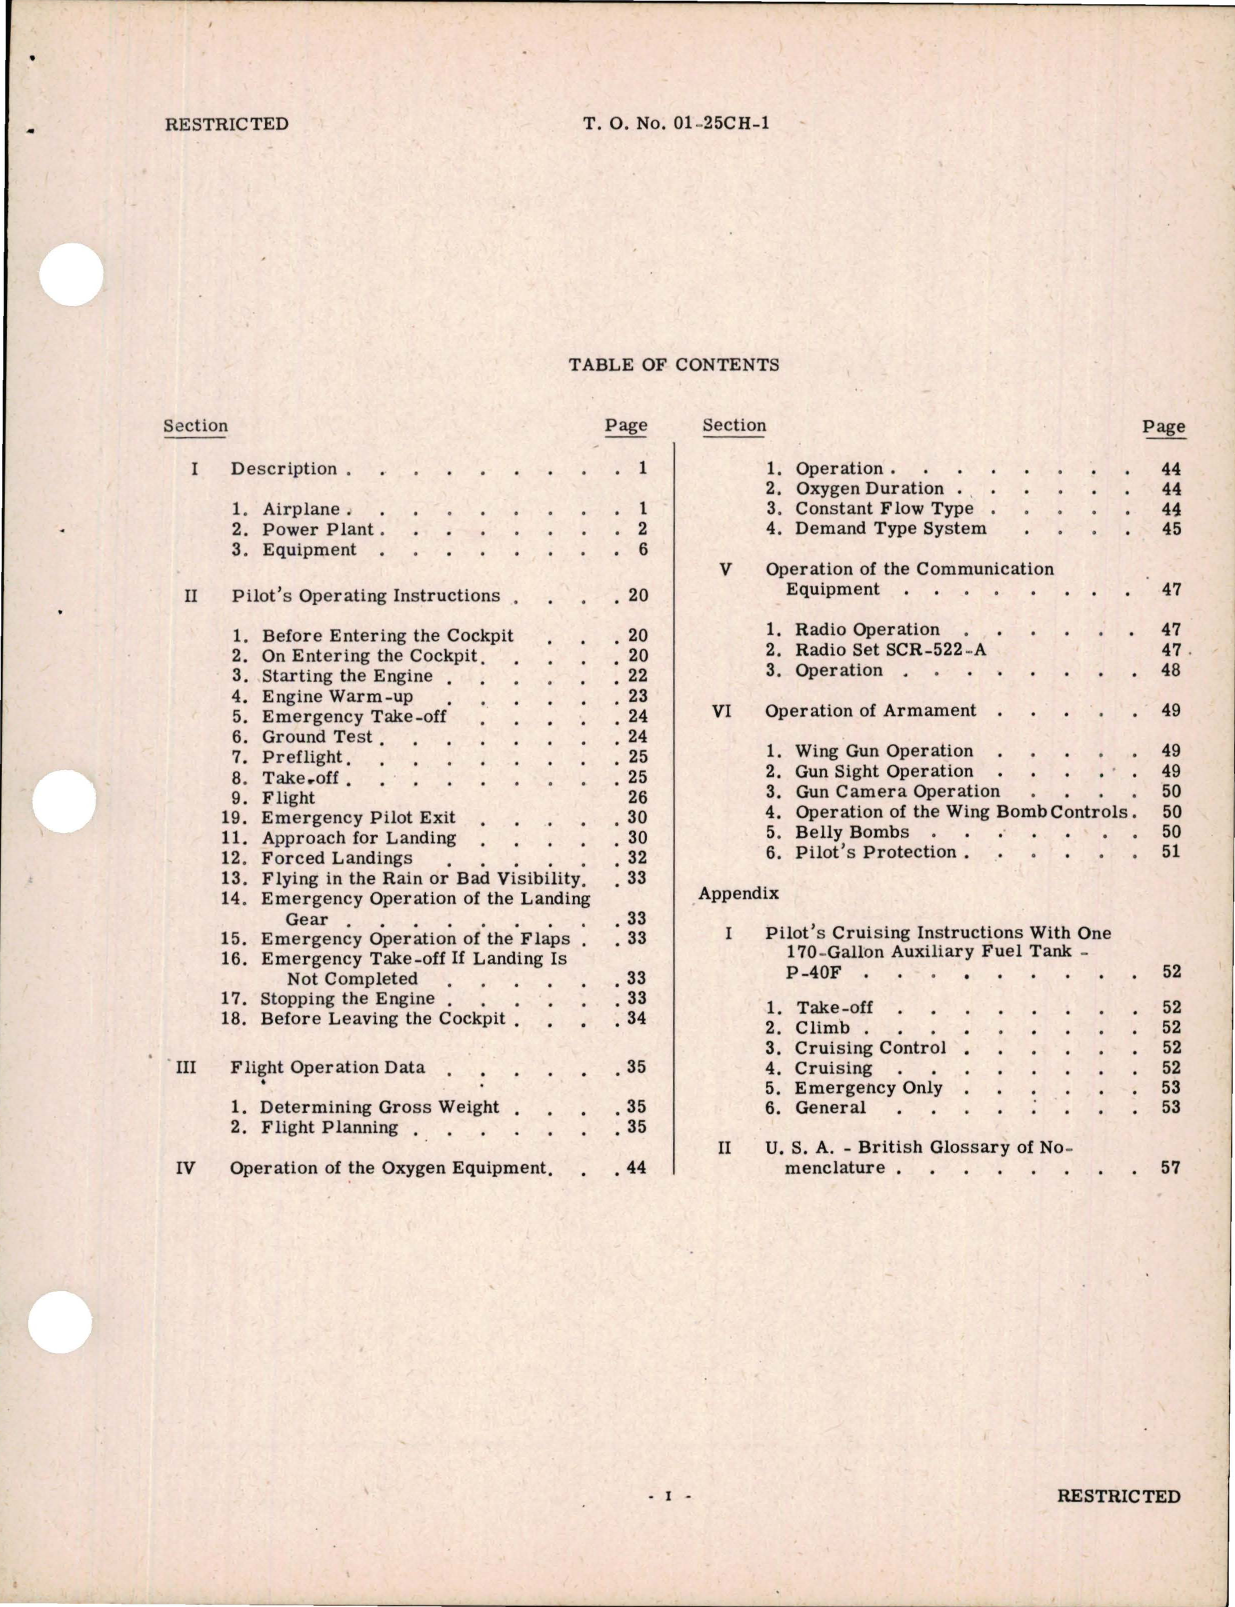 Sample page 5 from AirCorps Library document: Pilot's Flight Operating Instructions for P-40F and P-40L